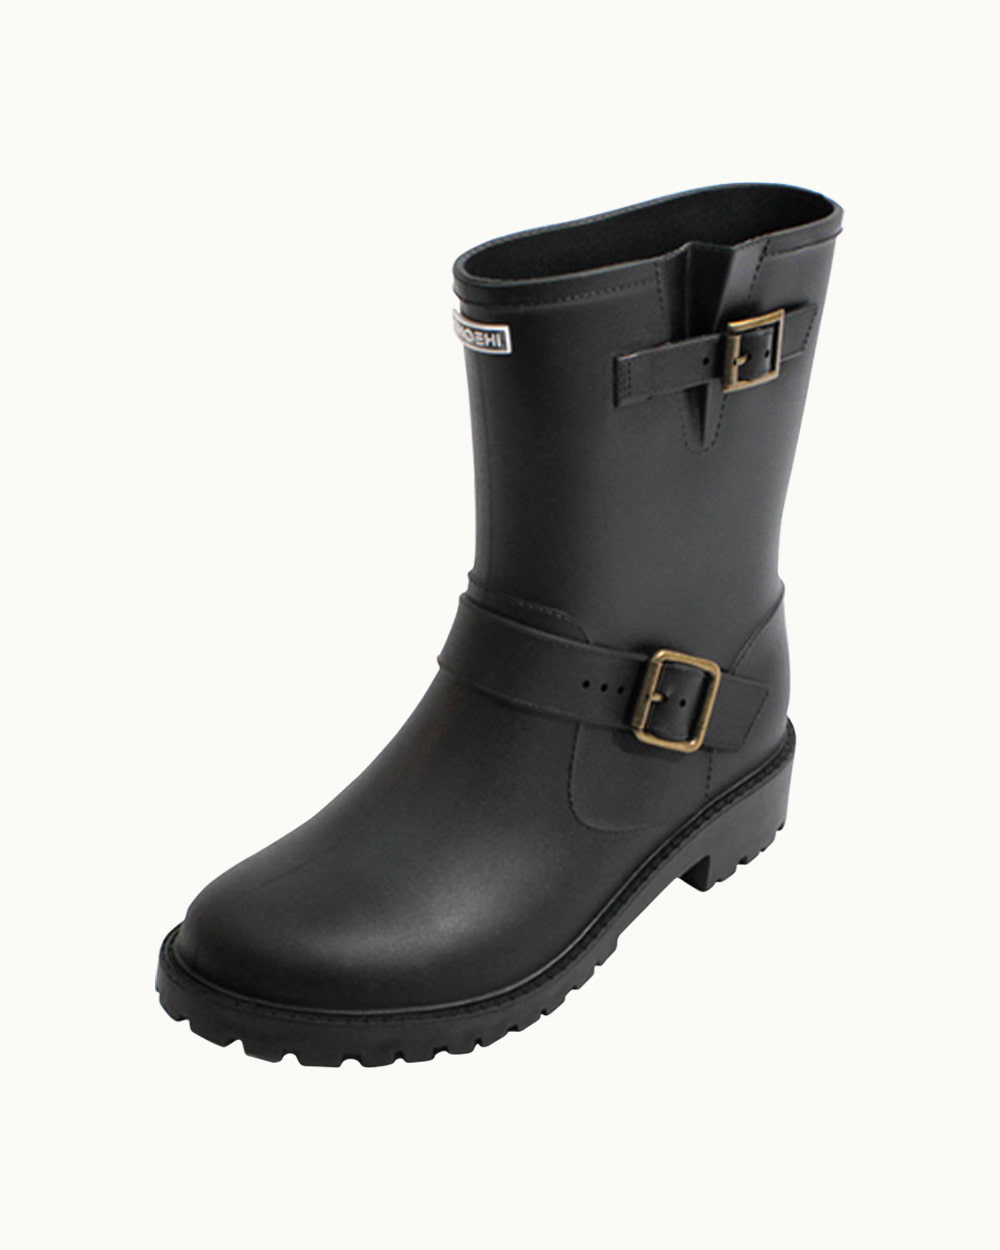 Reese Belt Middle Rain Boots